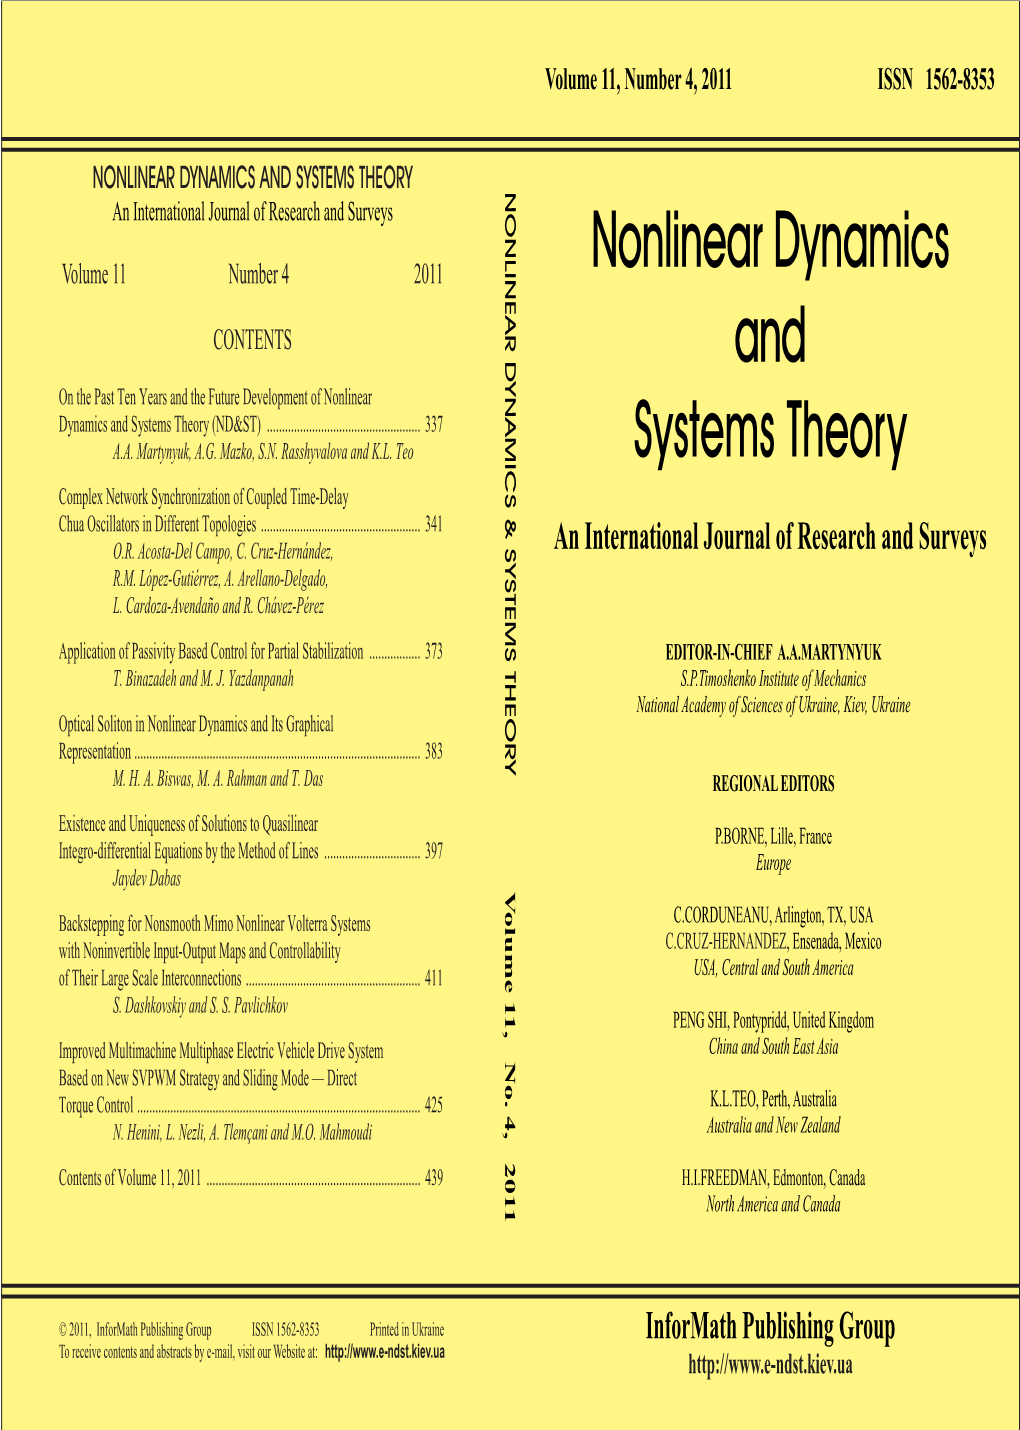 Nonlinear Dynamics and Systems Theory